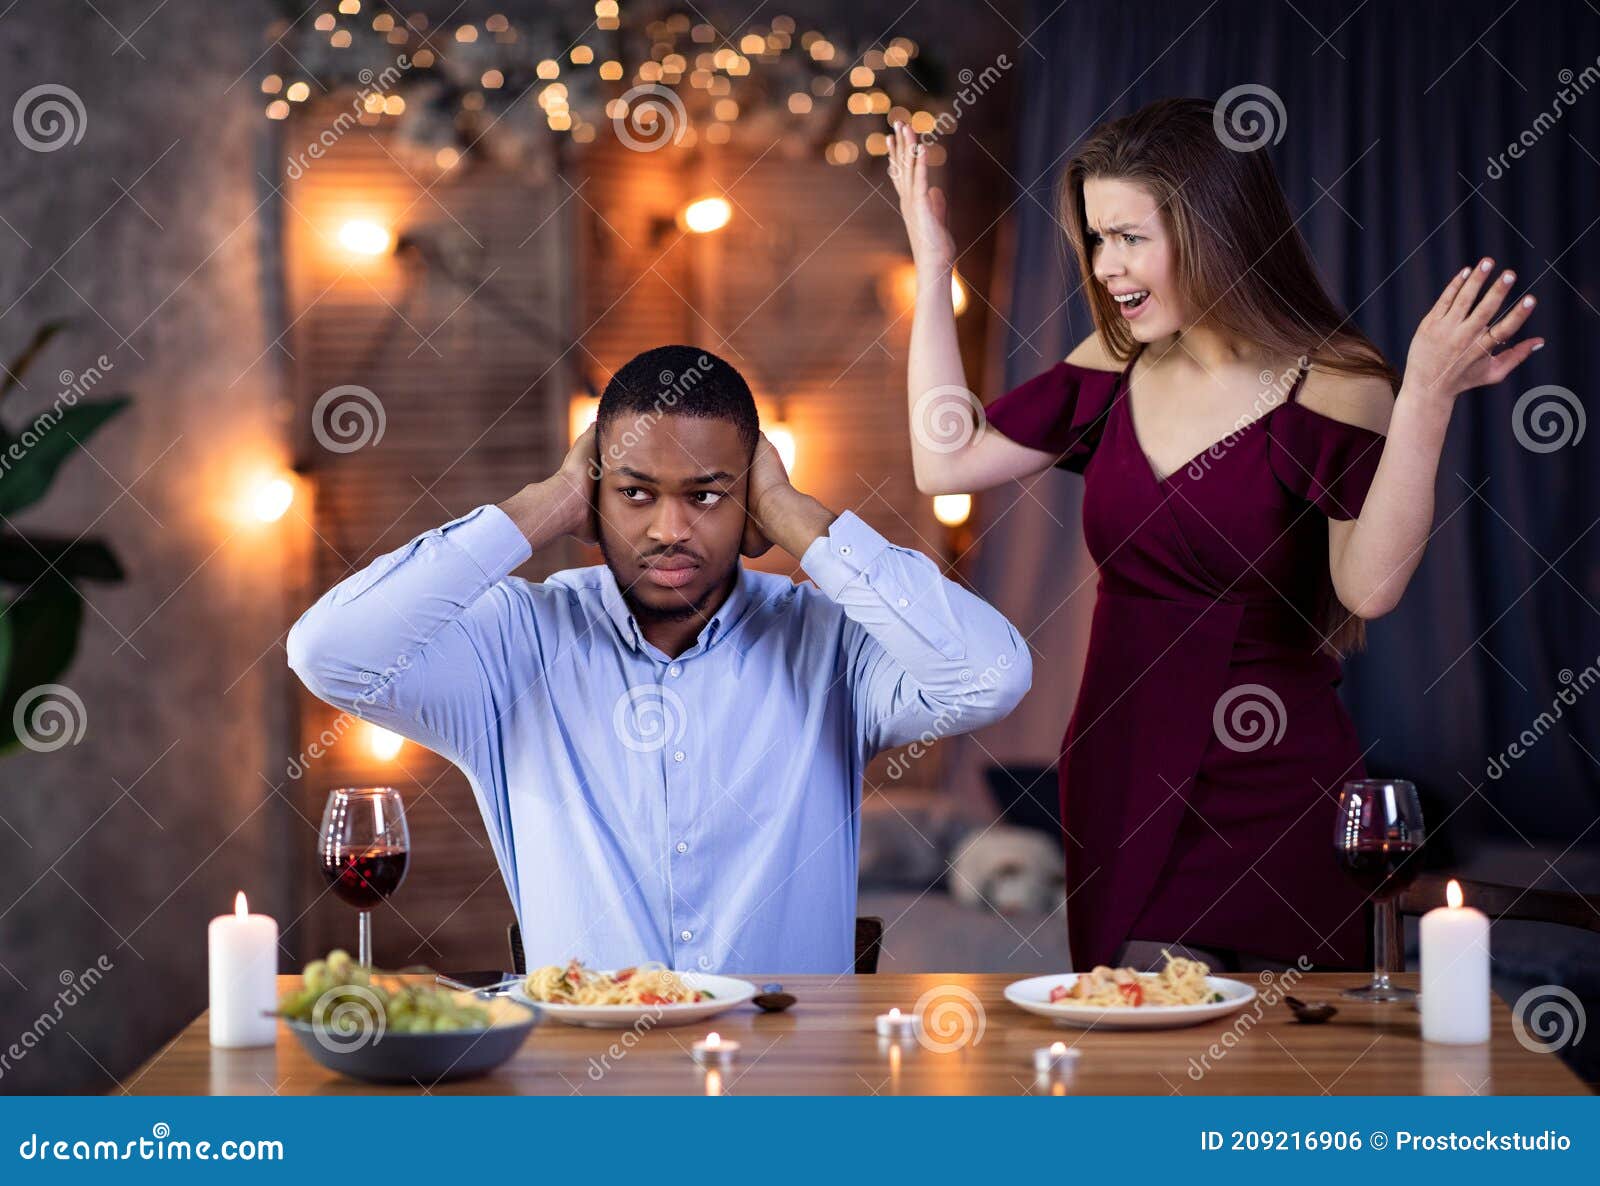 young interracial couple arguing during dinner date in restaurant